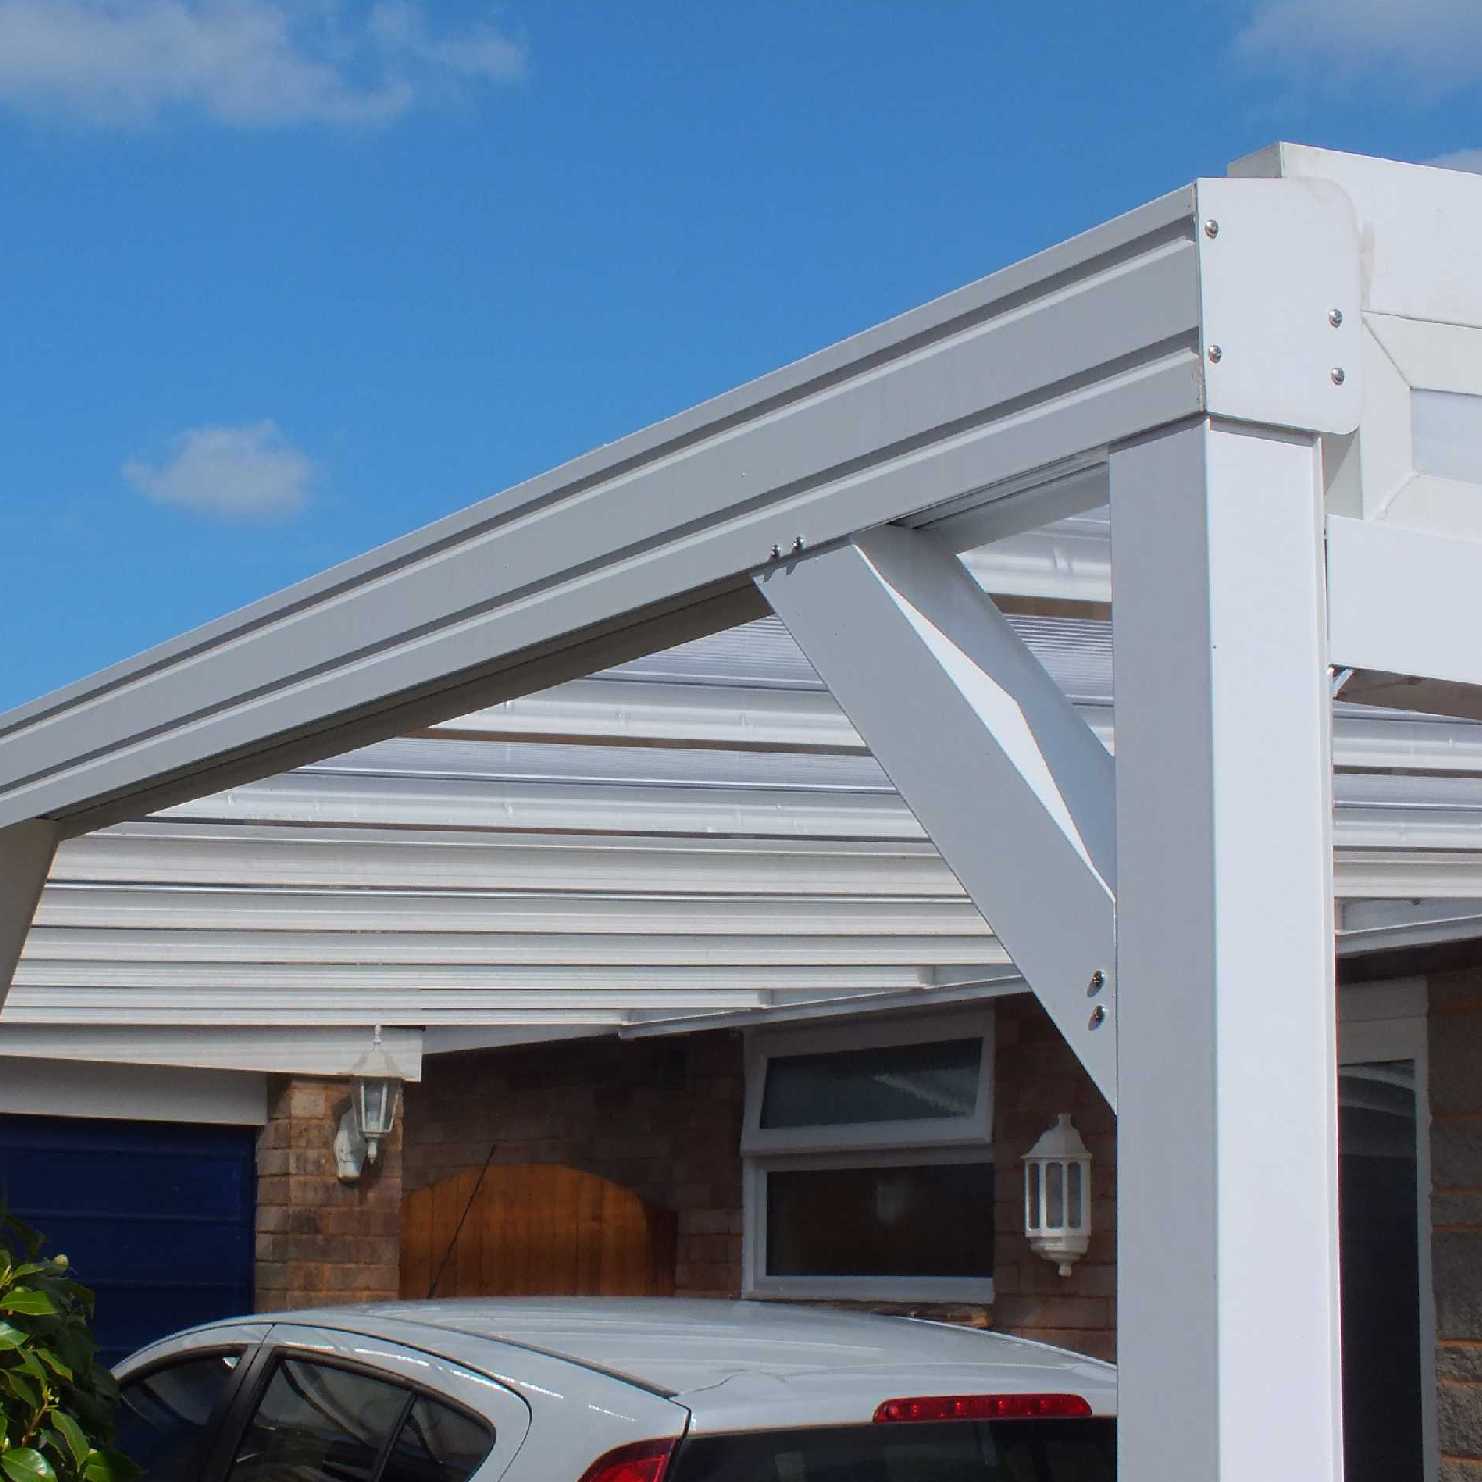 Great deals on Omega Smart Lean-To Canopy, White with 16mm Polycarbonate Glazing - 9.5m (W) x 1.5m (P), (5) Supporting Posts